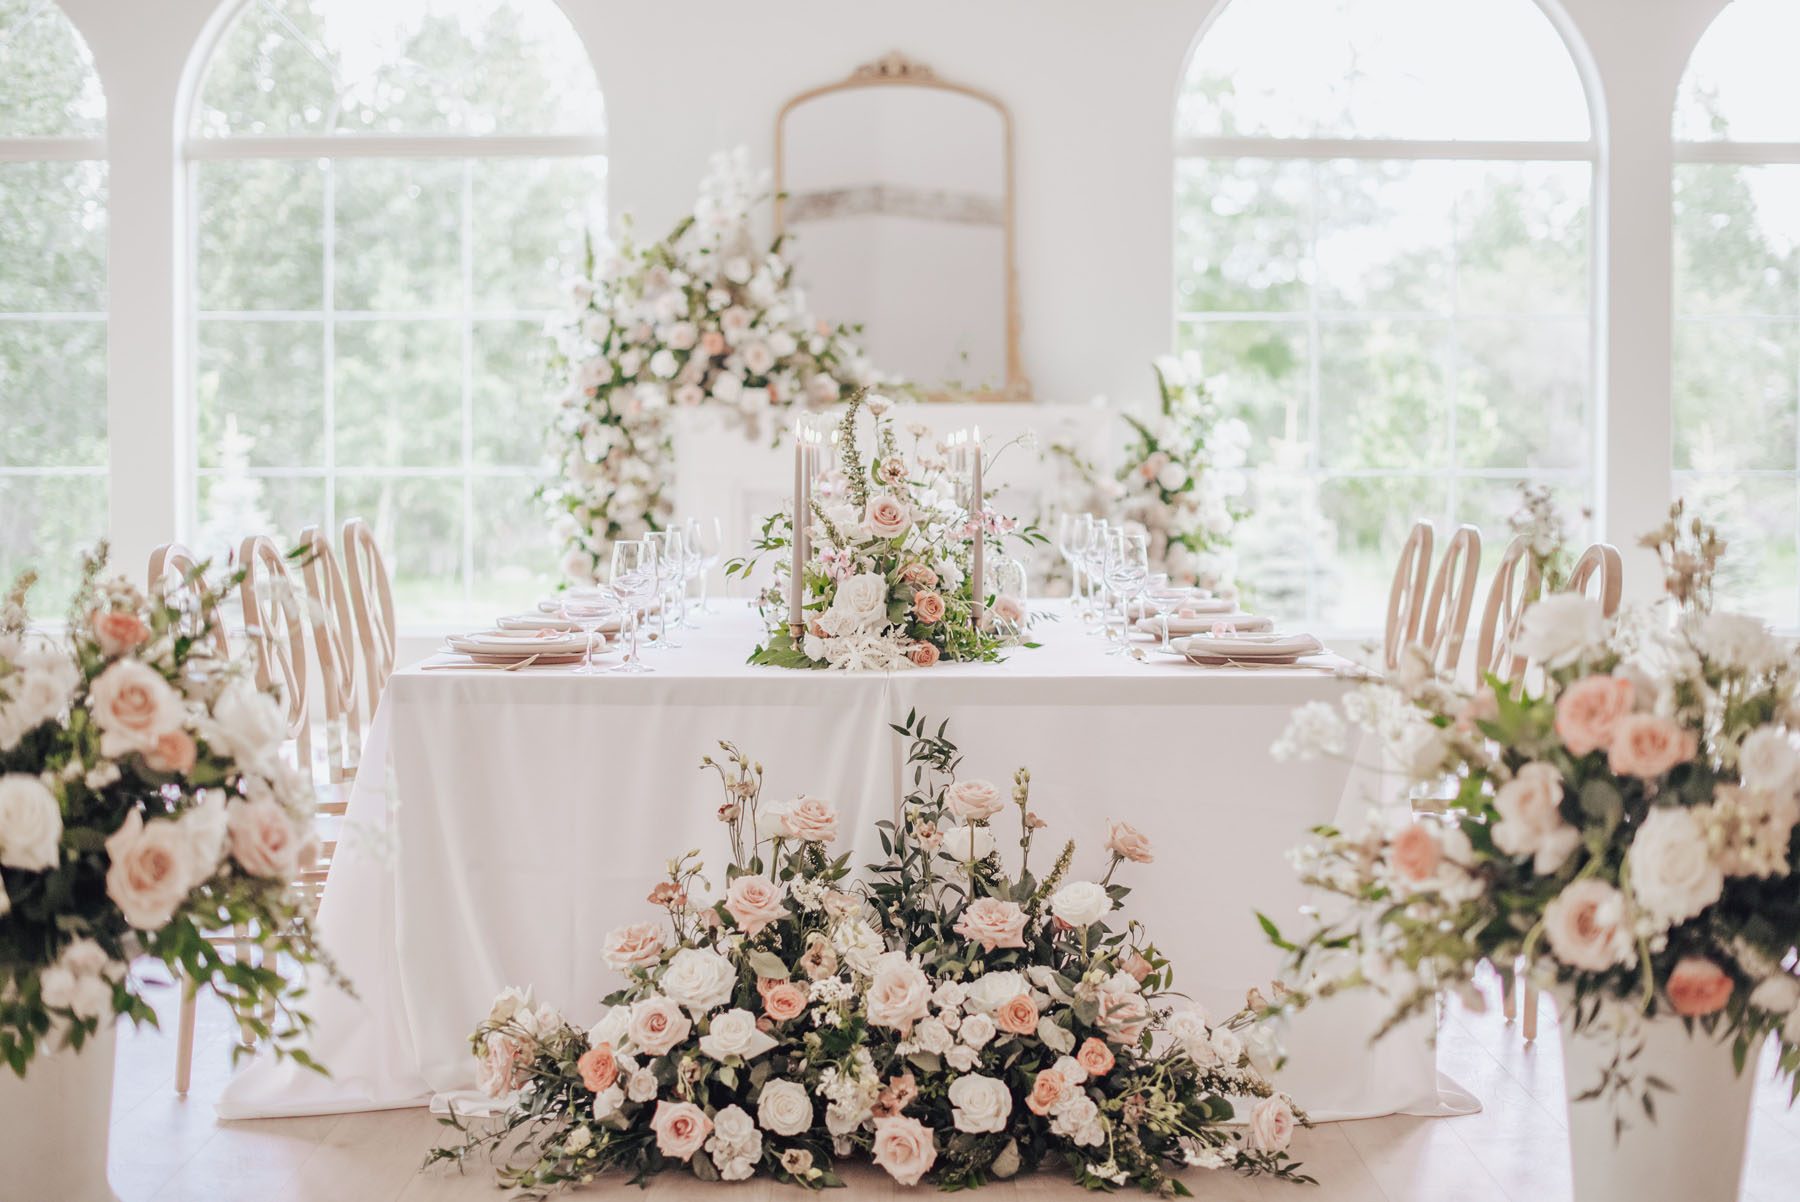 White wedding table with pink centerpieces and surrounding blush, pink and green arrangements